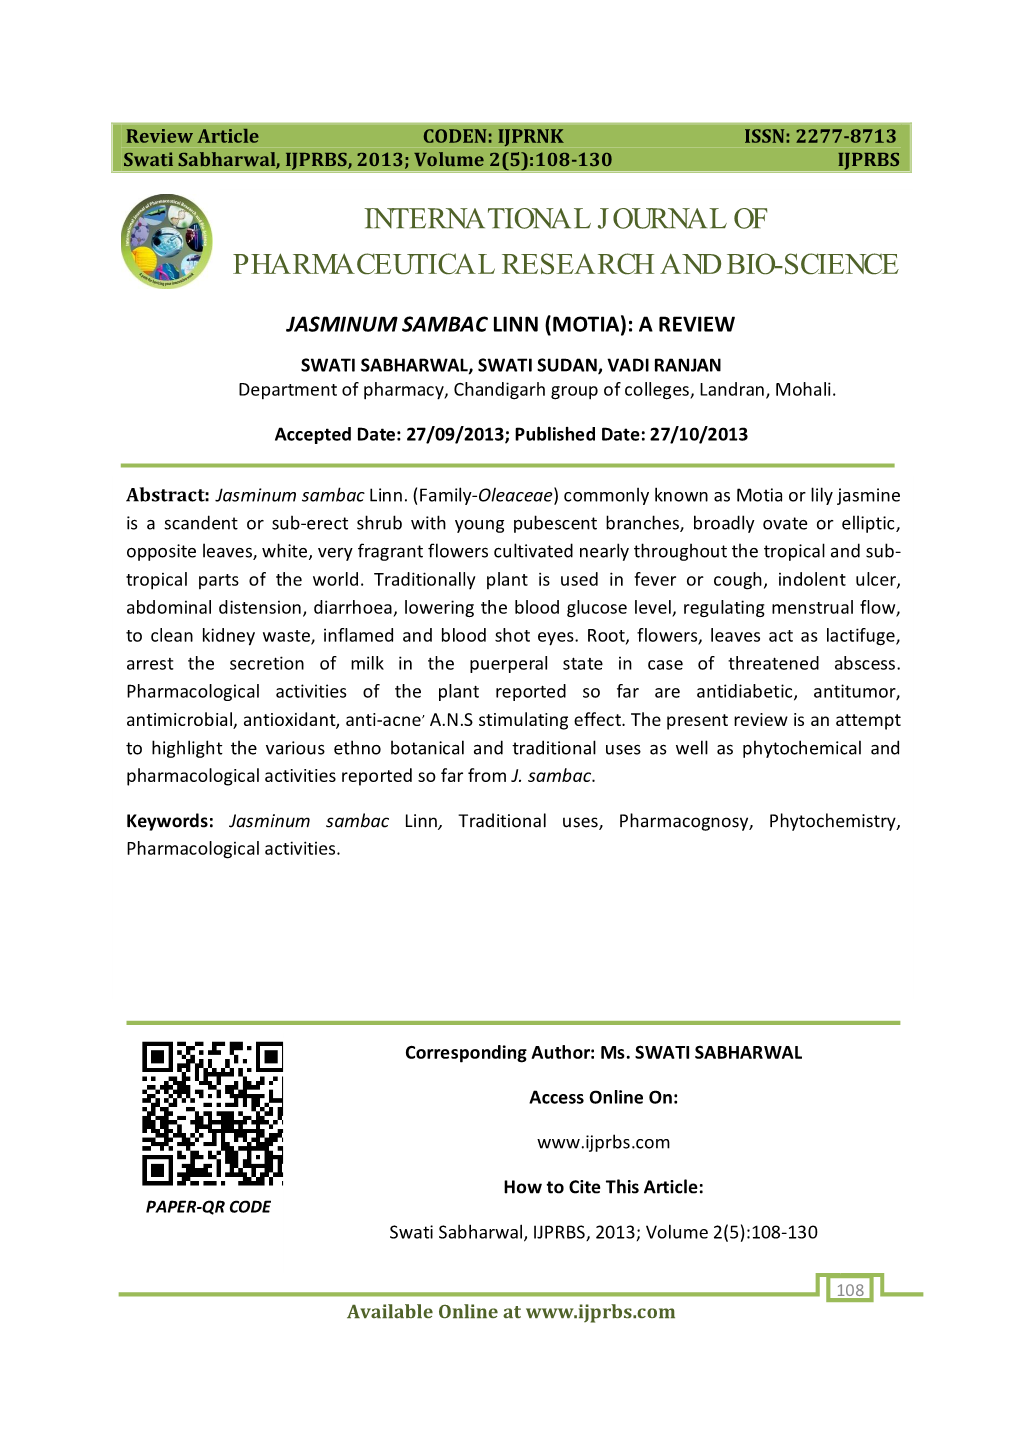 International Journal of Pharmaceutical Research and Bio-Science